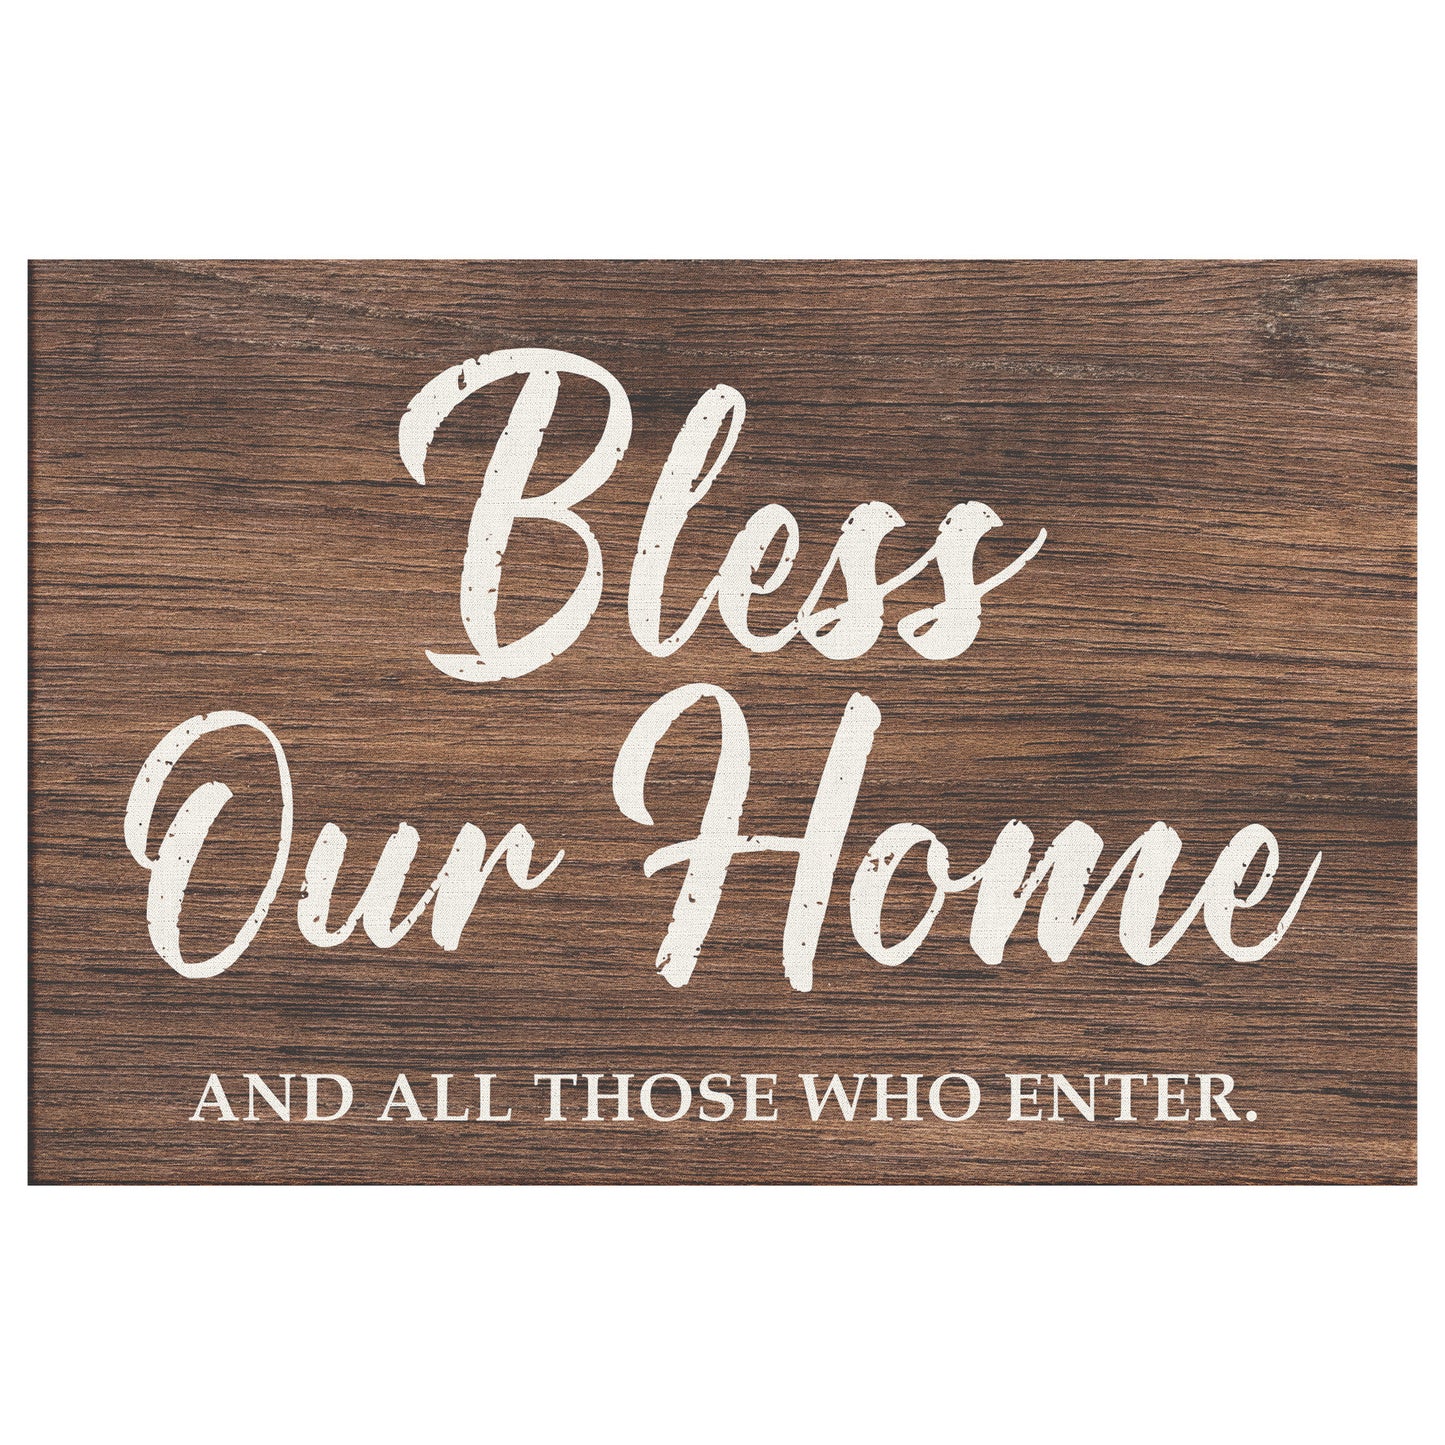 Bless Our Home Rustic Premium Canvas